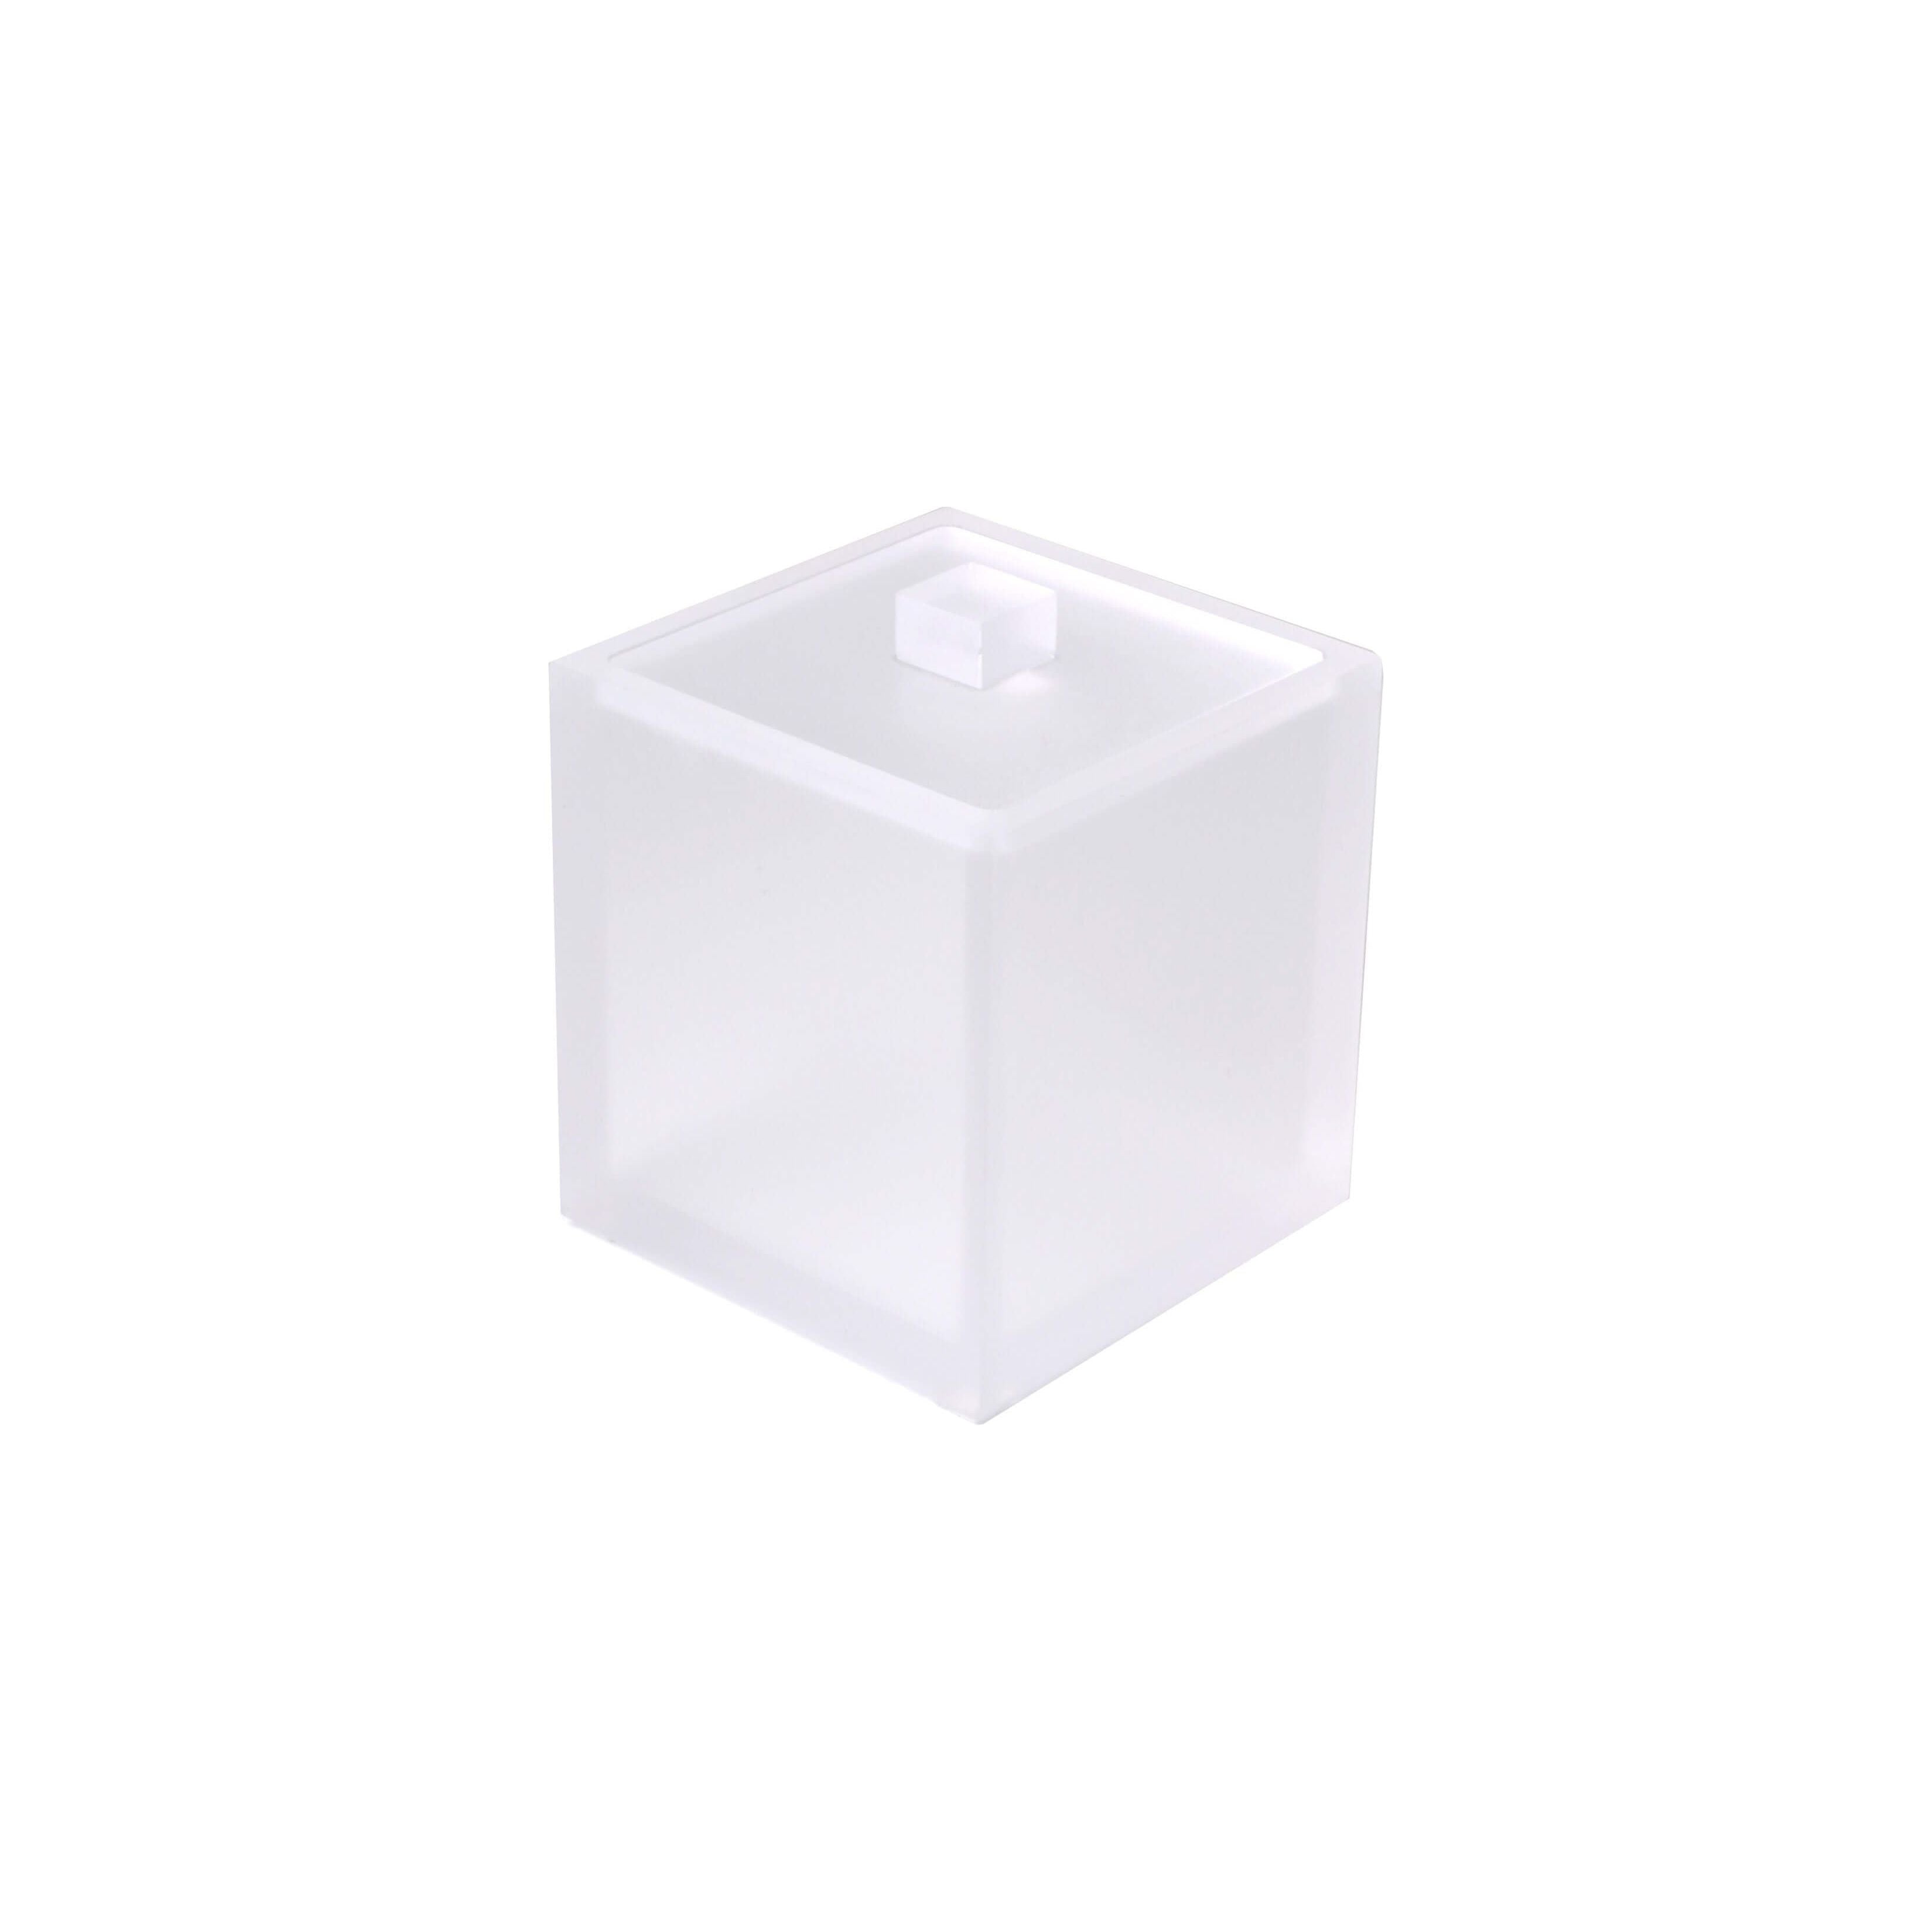 Mike + Ally - ICE Frosted Snow Container - 31133 - White - 